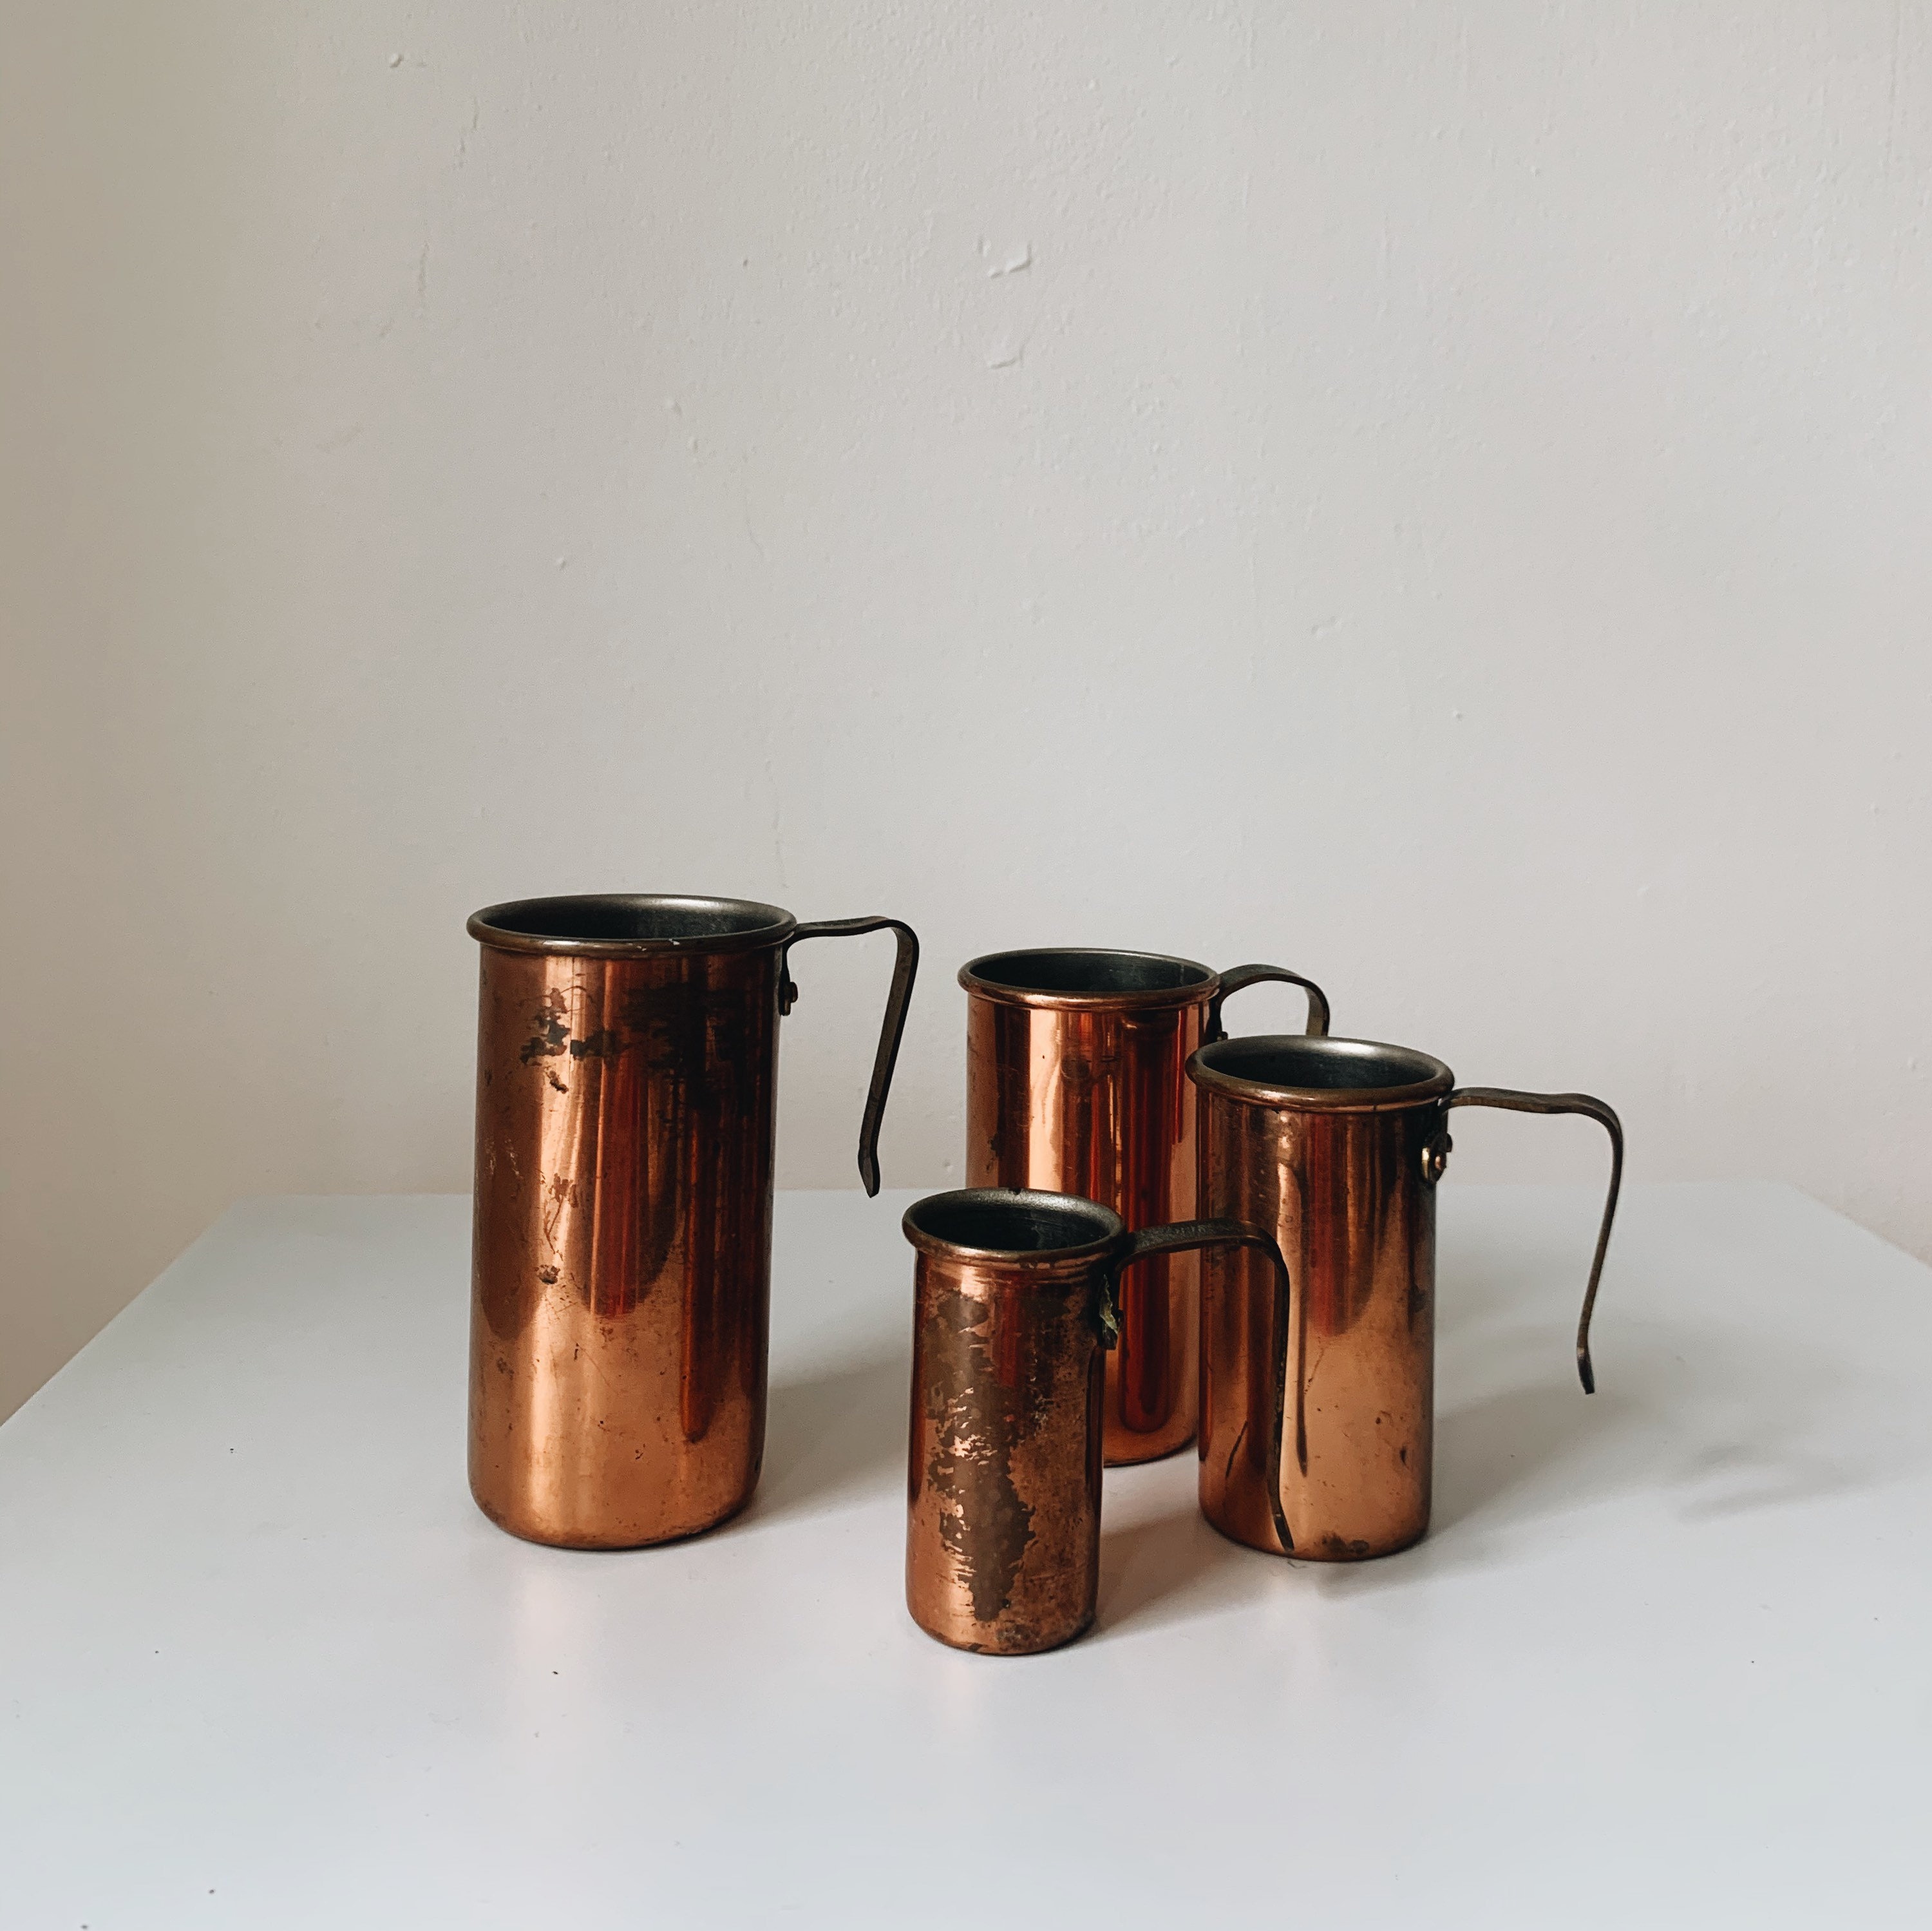 Vintage copper and brass measuring cups $29.95 #Magnoliaandwillowtw